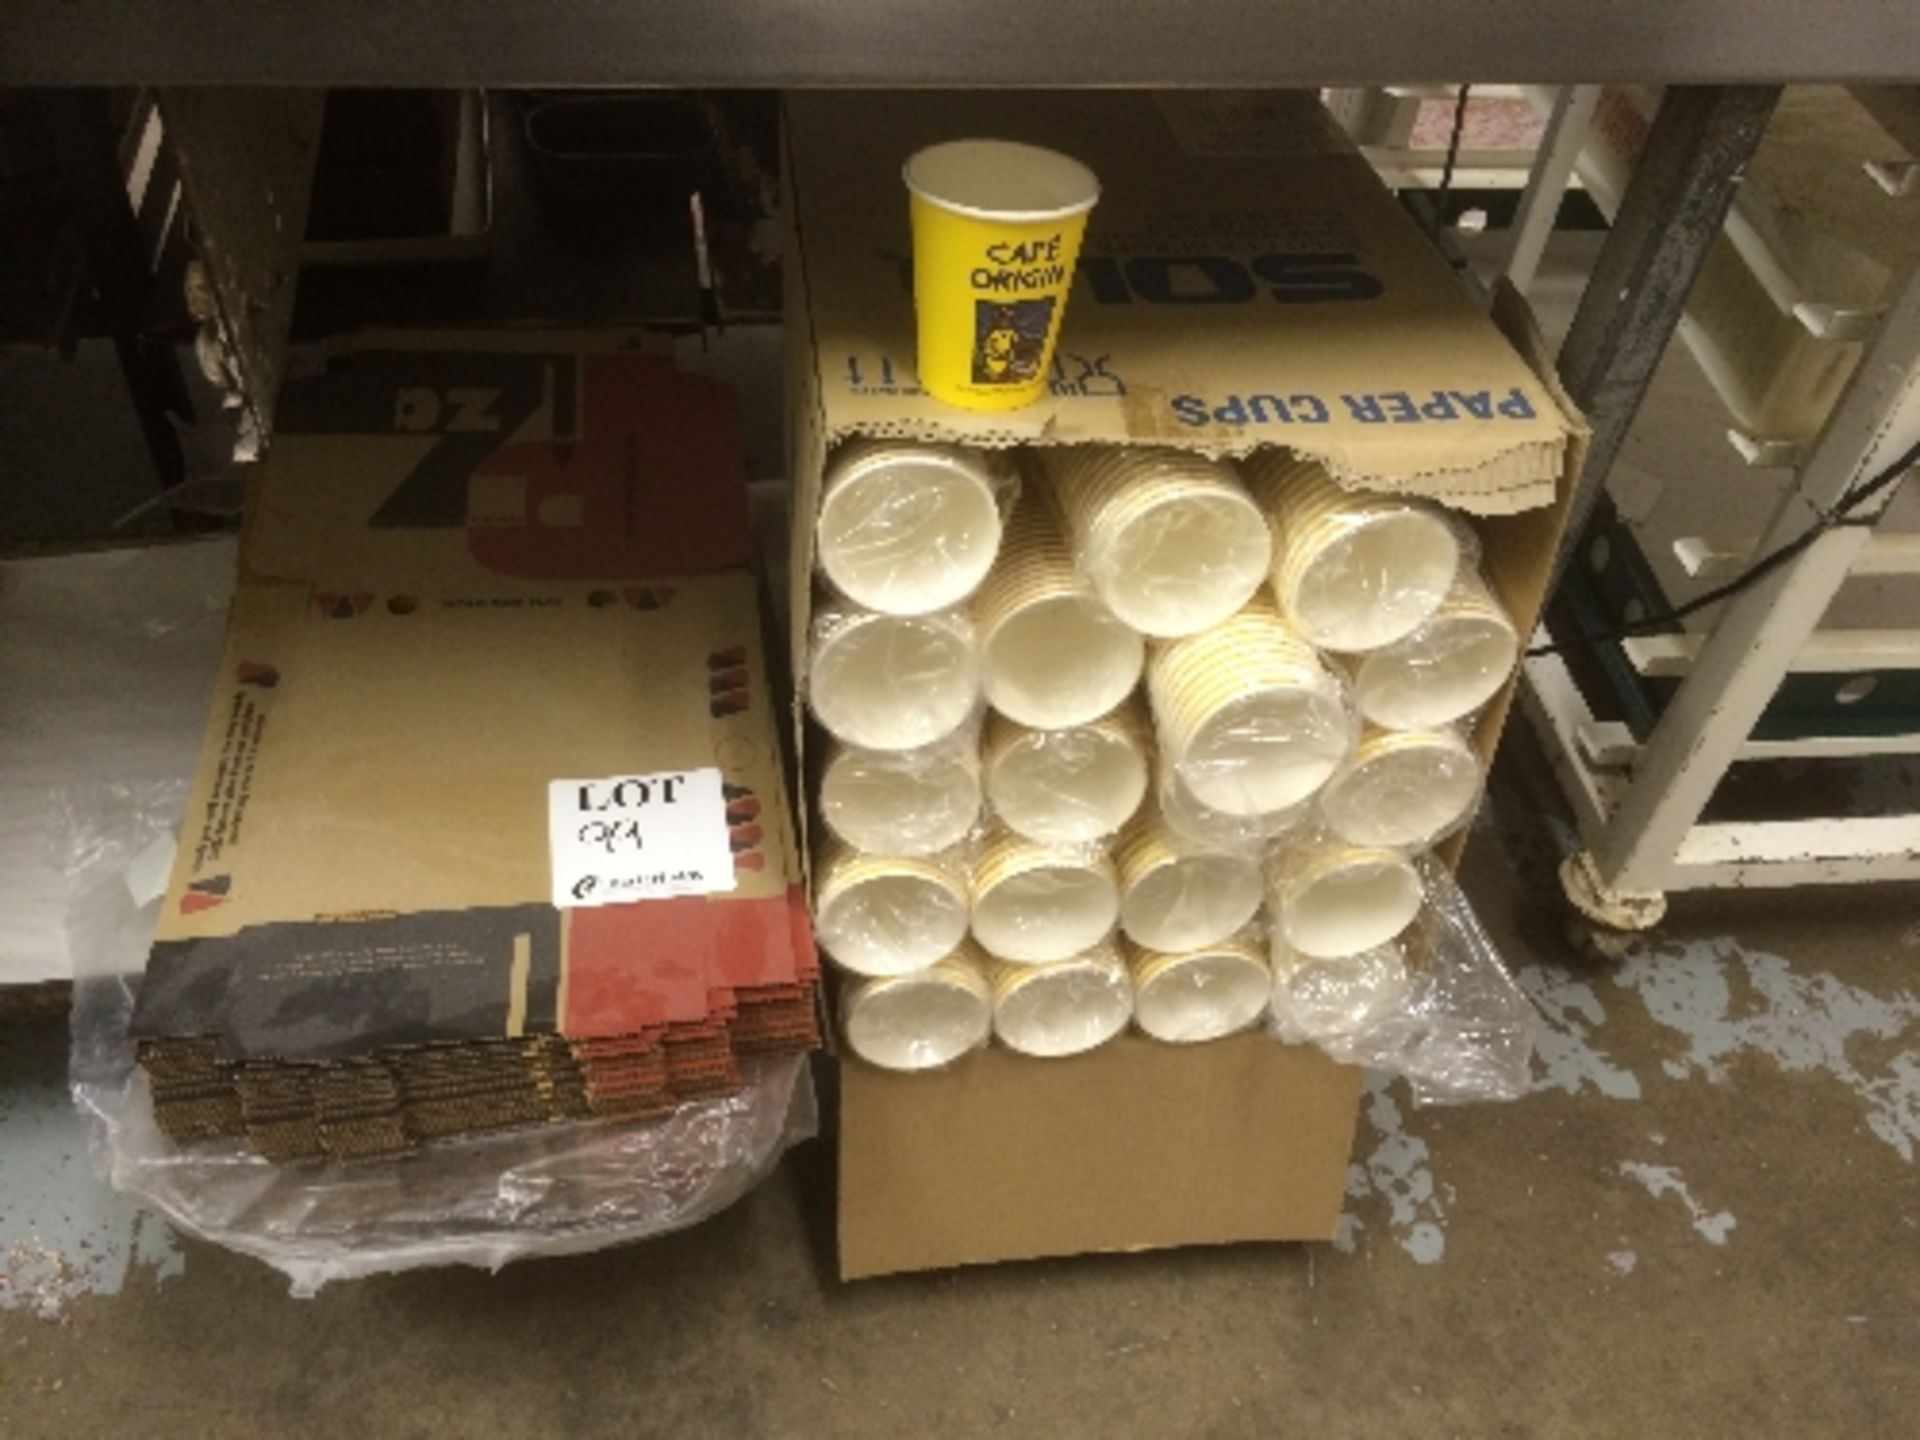 Quantity of pizza boxes and box of approximately 300 Cafe Original paper hot cups